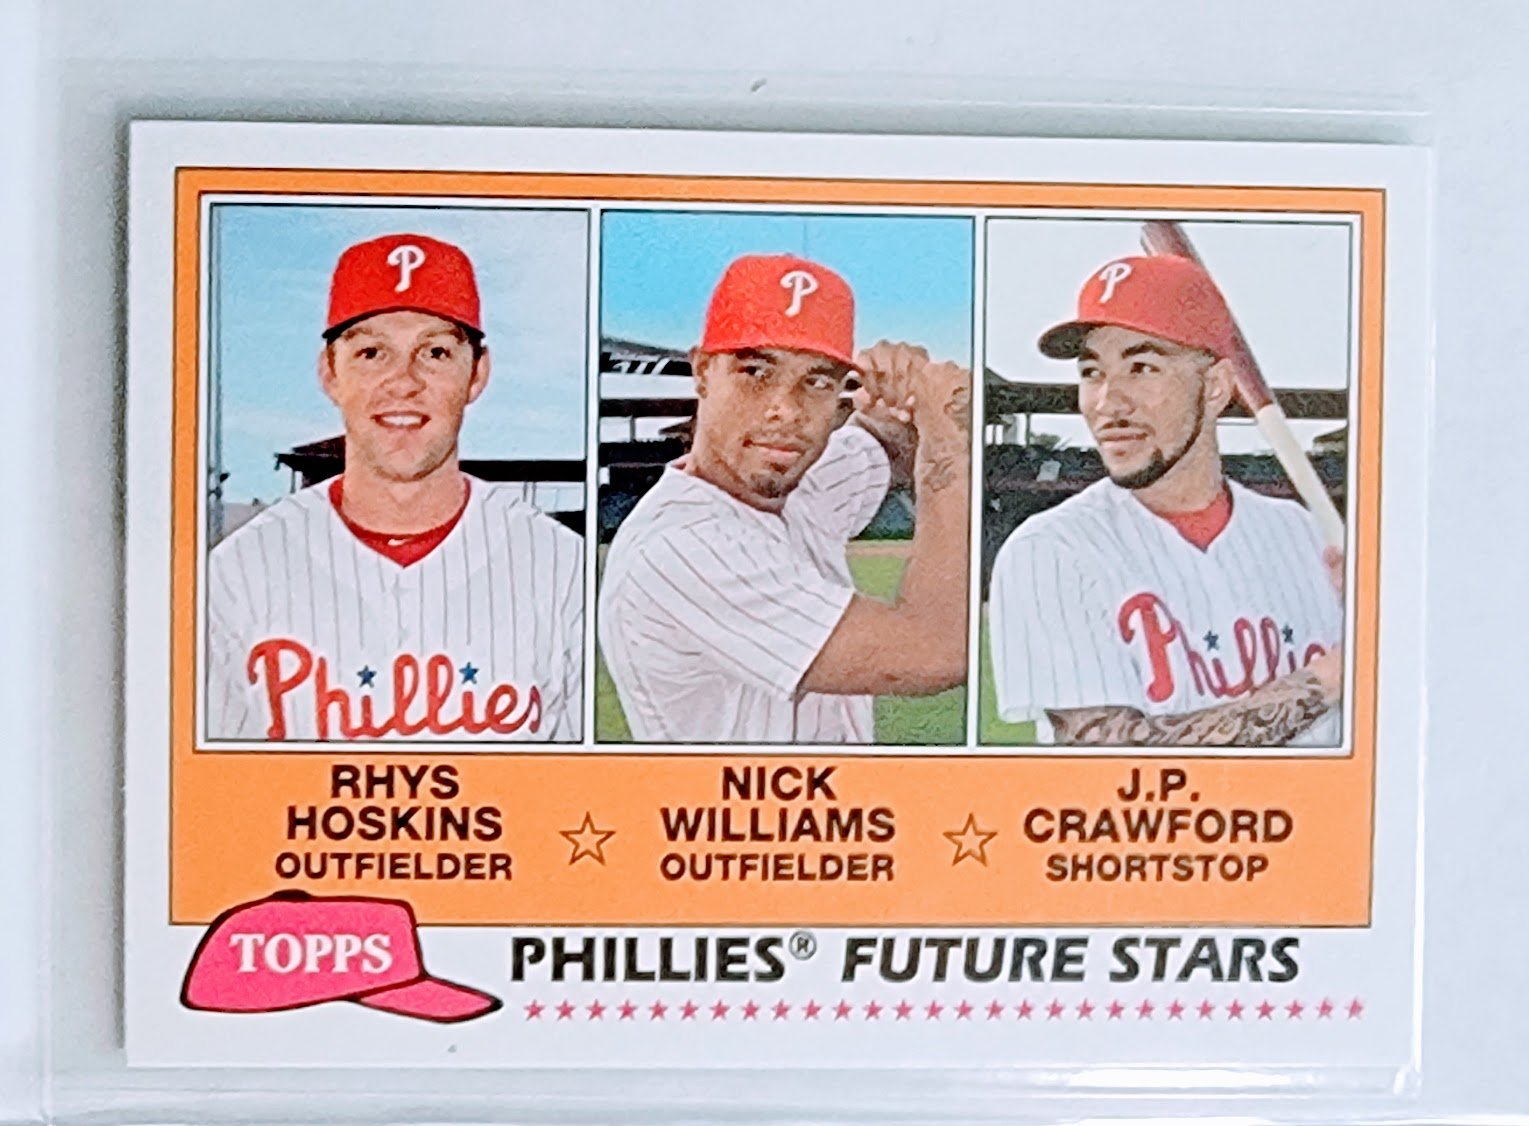 2018 Topps Heritage Phillies Future Stars Rhys Hoskins, Nick Williams & J.P. Crawford Baseball Card TPTV simple Xclusive Collectibles   